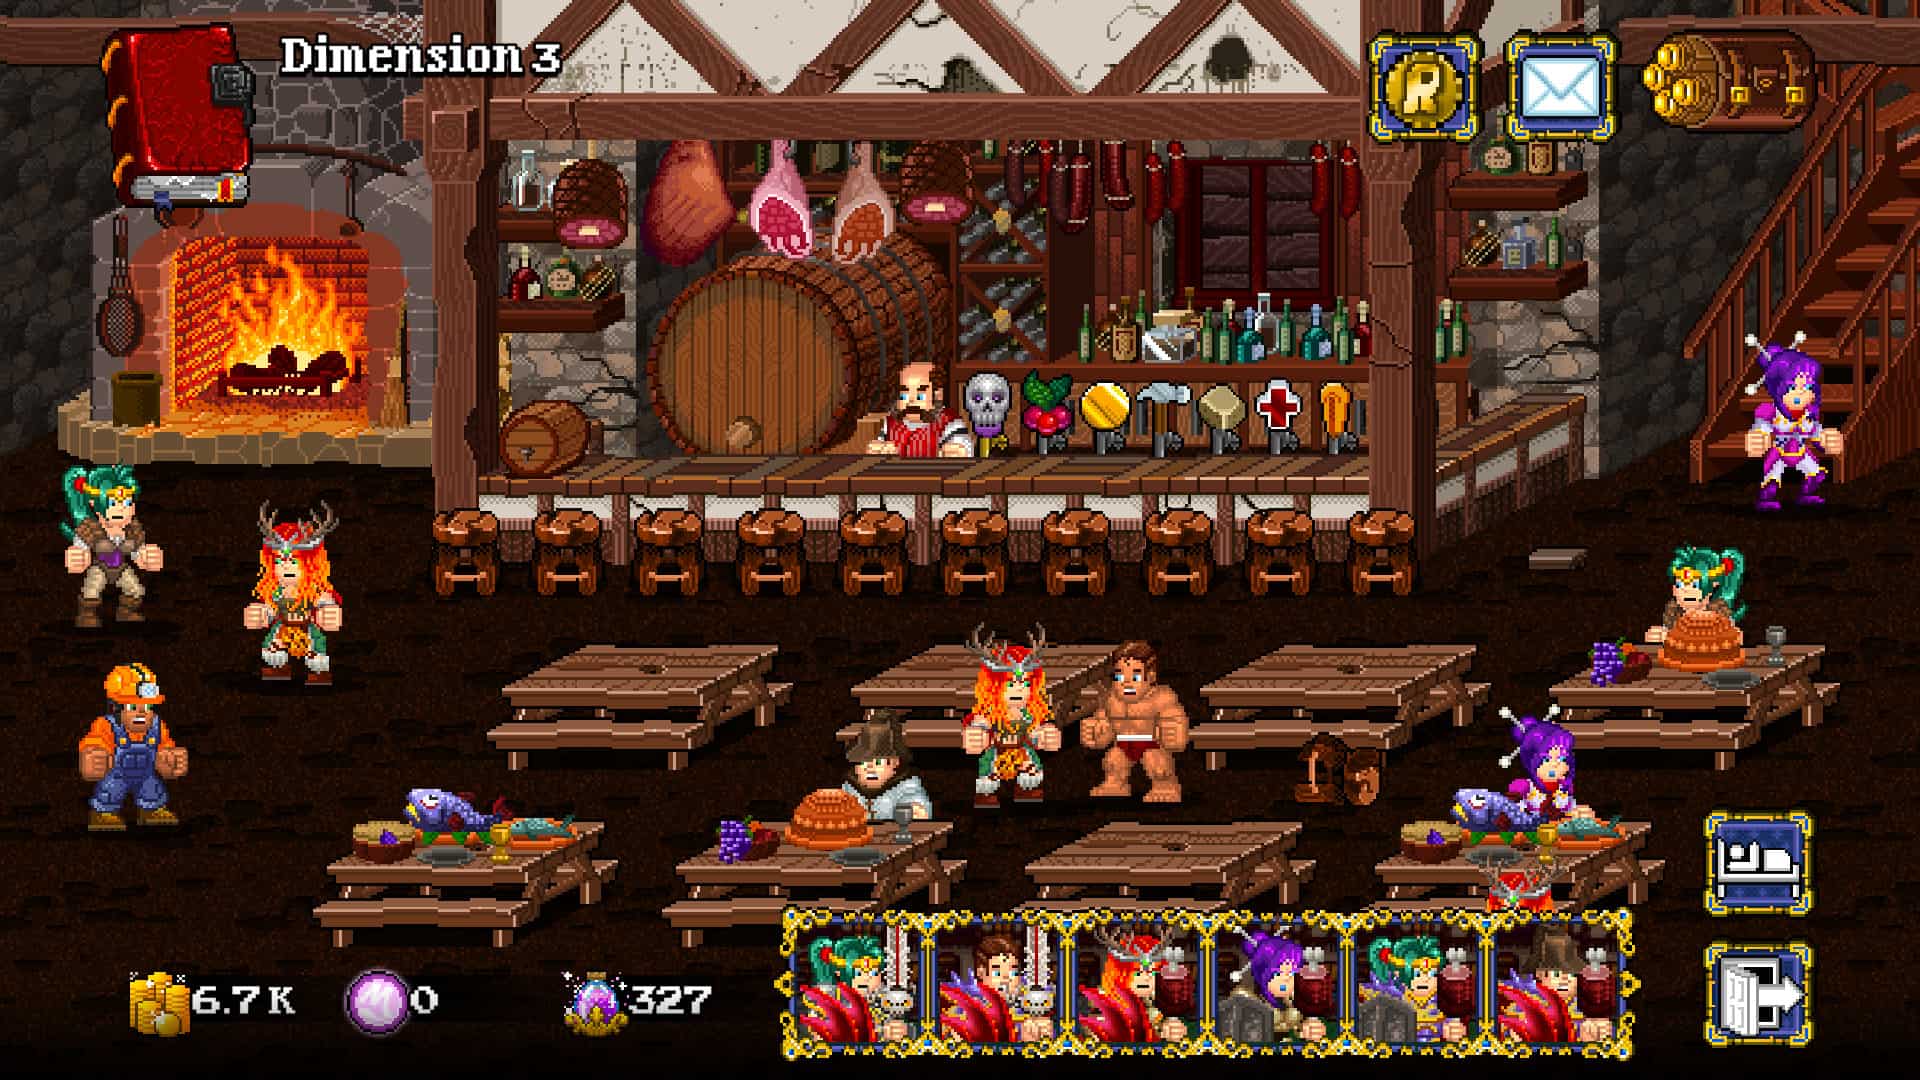 soda dungeon guide wd